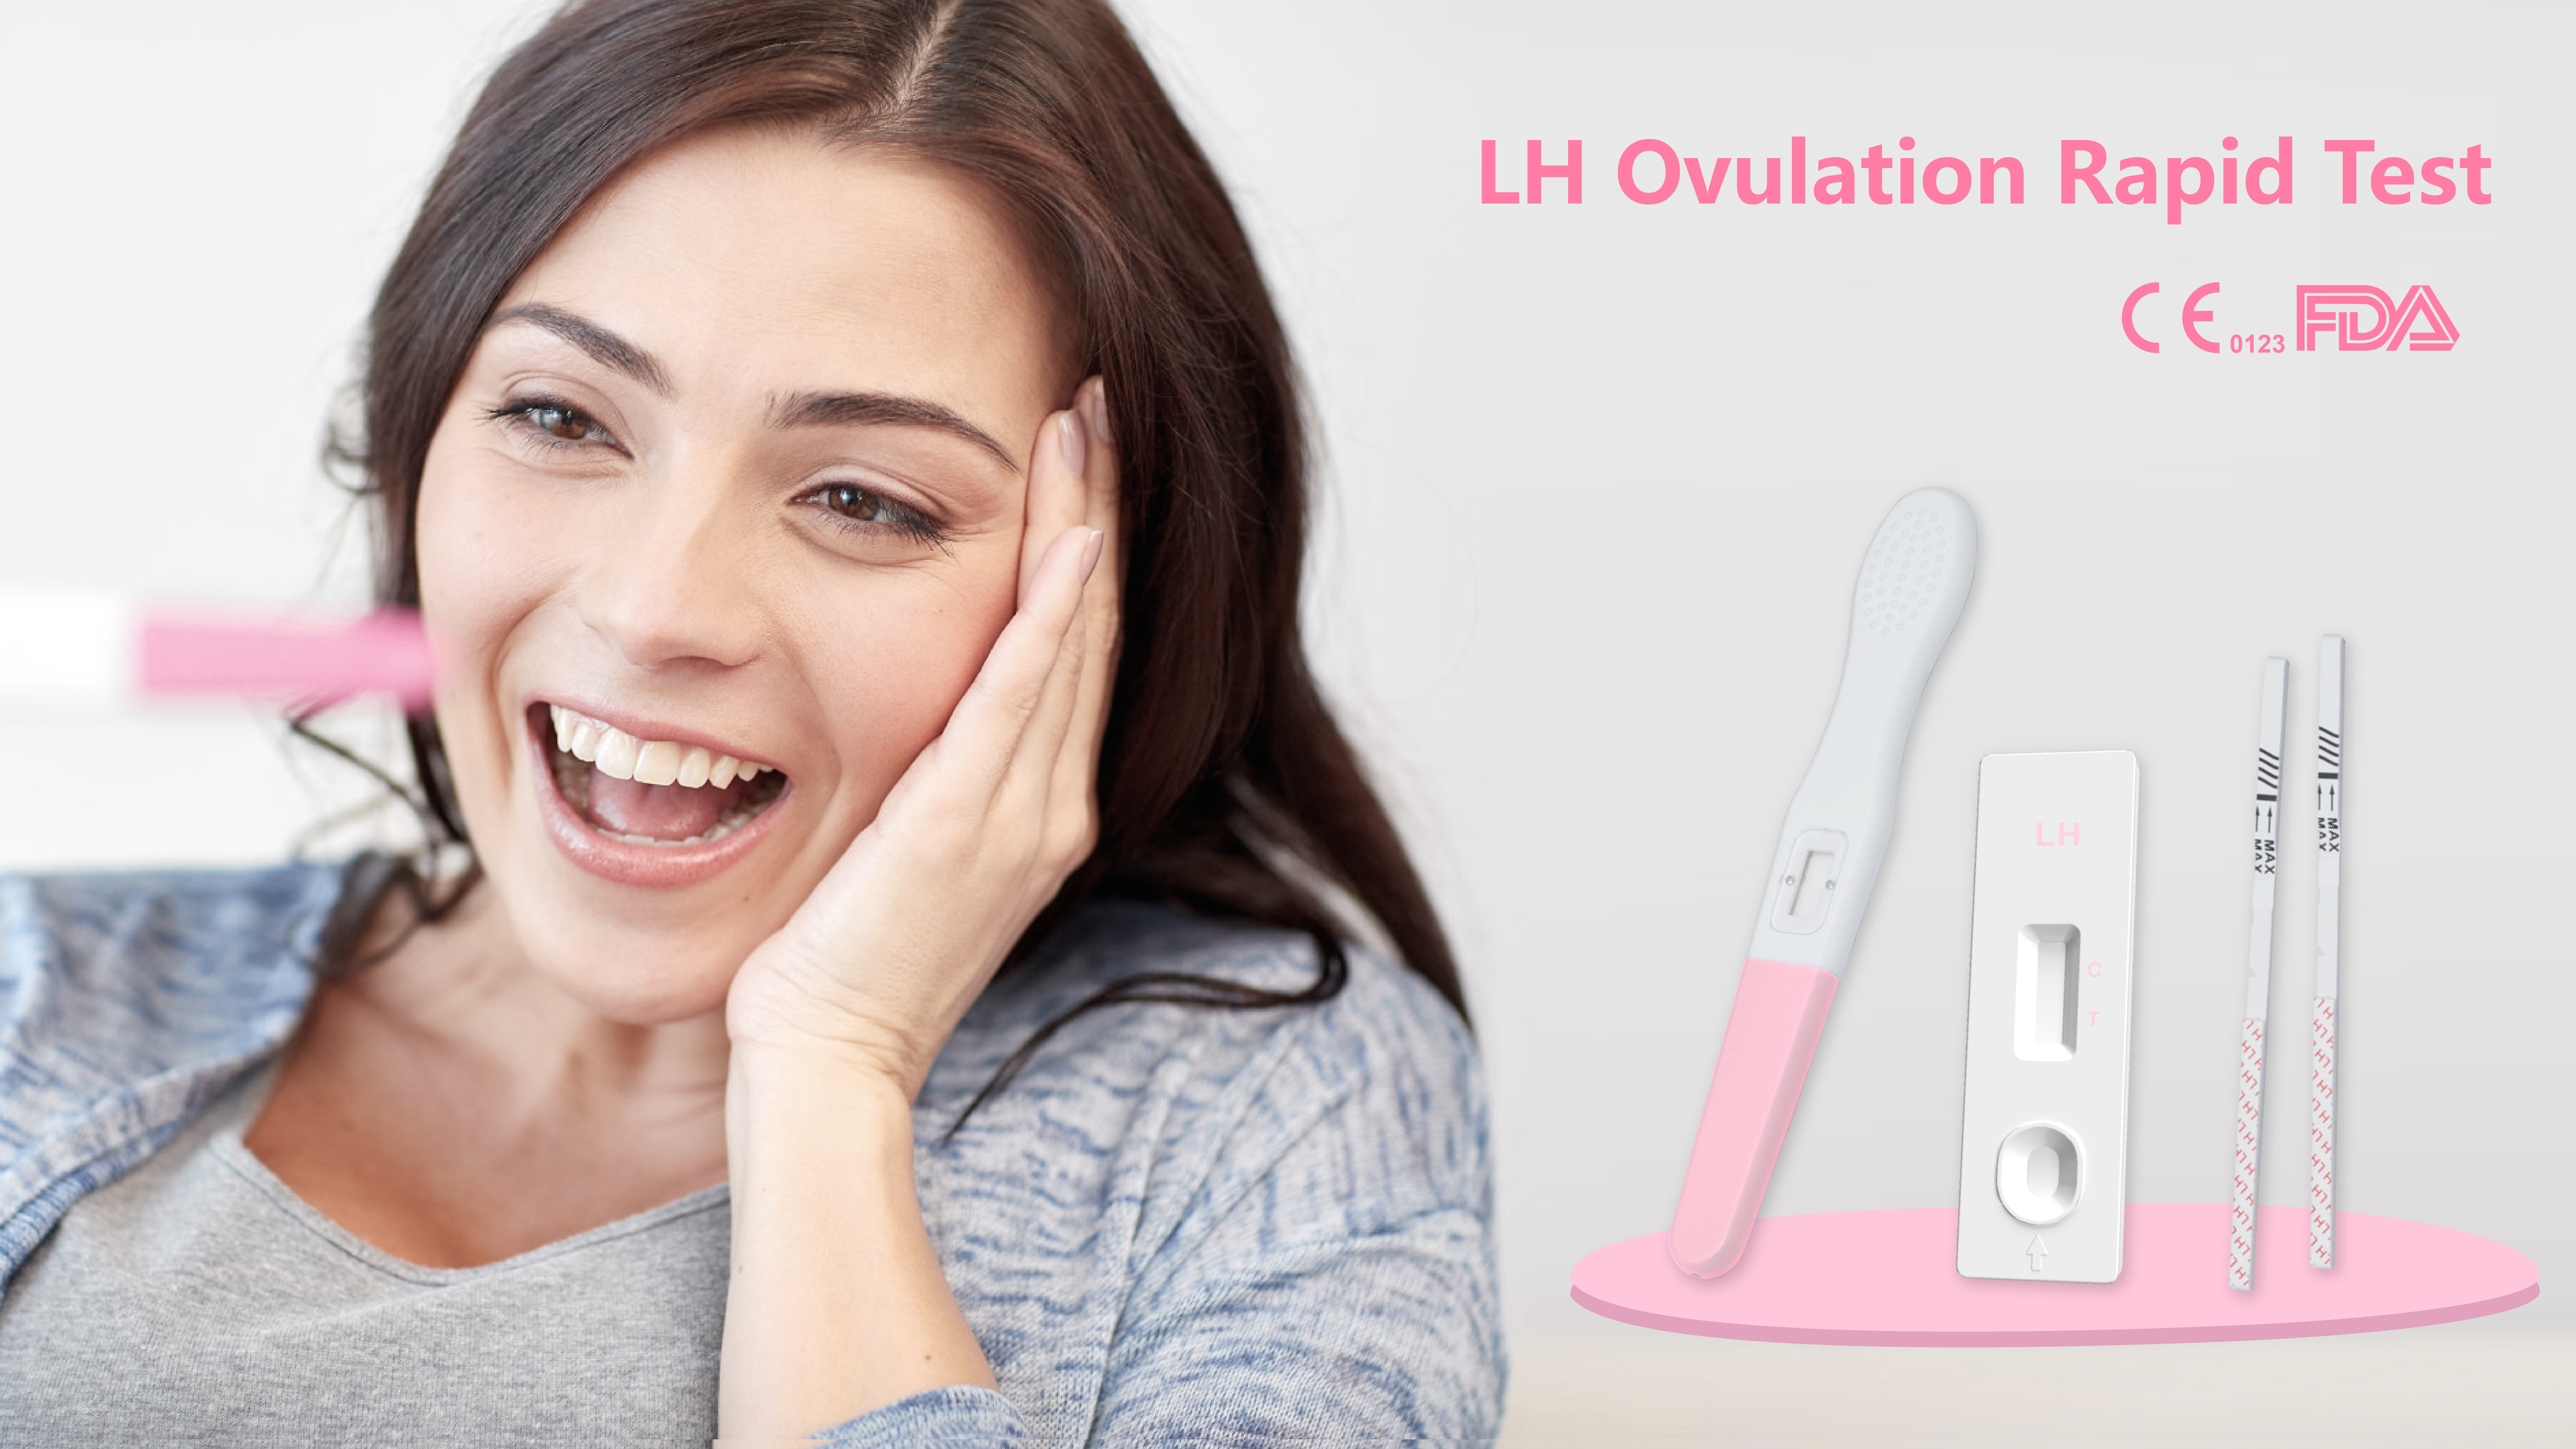 Have you used the right method to ovulation test?